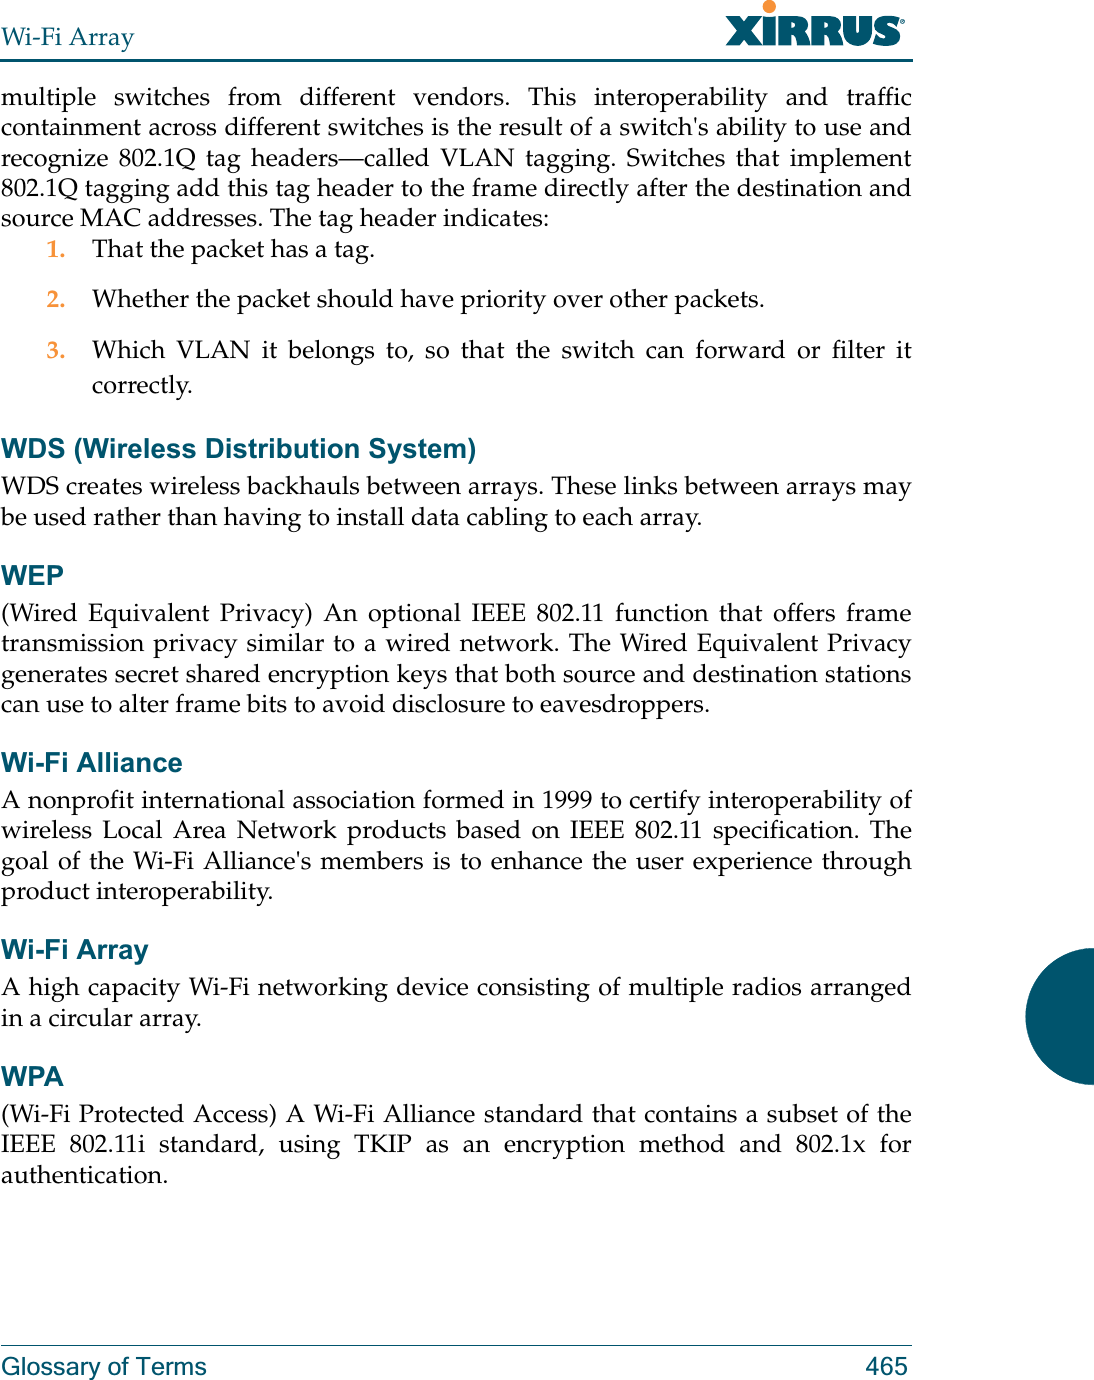 Wi-Fi ArrayGlossary of Terms 465multiple switches from different vendors. This interoperability and traffic containment across different switches is the result of a switch&apos;s ability to use and recognize 802.1Q tag headers—called VLAN tagging. Switches that implement 802.1Q tagging add this tag header to the frame directly after the destination and source MAC addresses. The tag header indicates:1. That the packet has a tag.2. Whether the packet should have priority over other packets.3. Which VLAN it belongs to, so that the switch can forward or filter it correctly.WDS (Wireless Distribution System)WDS creates wireless backhauls between arrays. These links between arrays may be used rather than having to install data cabling to each array. WEP(Wired Equivalent Privacy) An optional IEEE 802.11 function that offers frame transmission privacy similar to a wired network. The Wired Equivalent Privacy generates secret shared encryption keys that both source and destination stations can use to alter frame bits to avoid disclosure to eavesdroppers.Wi-Fi AllianceA nonprofit international association formed in 1999 to certify interoperability of wireless Local Area Network products based on IEEE 802.11 specification. The goal of the Wi-Fi Alliance&apos;s members is to enhance the user experience through product interoperability.Wi-Fi ArrayA high capacity Wi-Fi networking device consisting of multiple radios arranged in a circular array.WPA(Wi-Fi Protected Access) A Wi-Fi Alliance standard that contains a subset of the IEEE 802.11i standard, using TKIP as an encryption method and 802.1x for authentication.